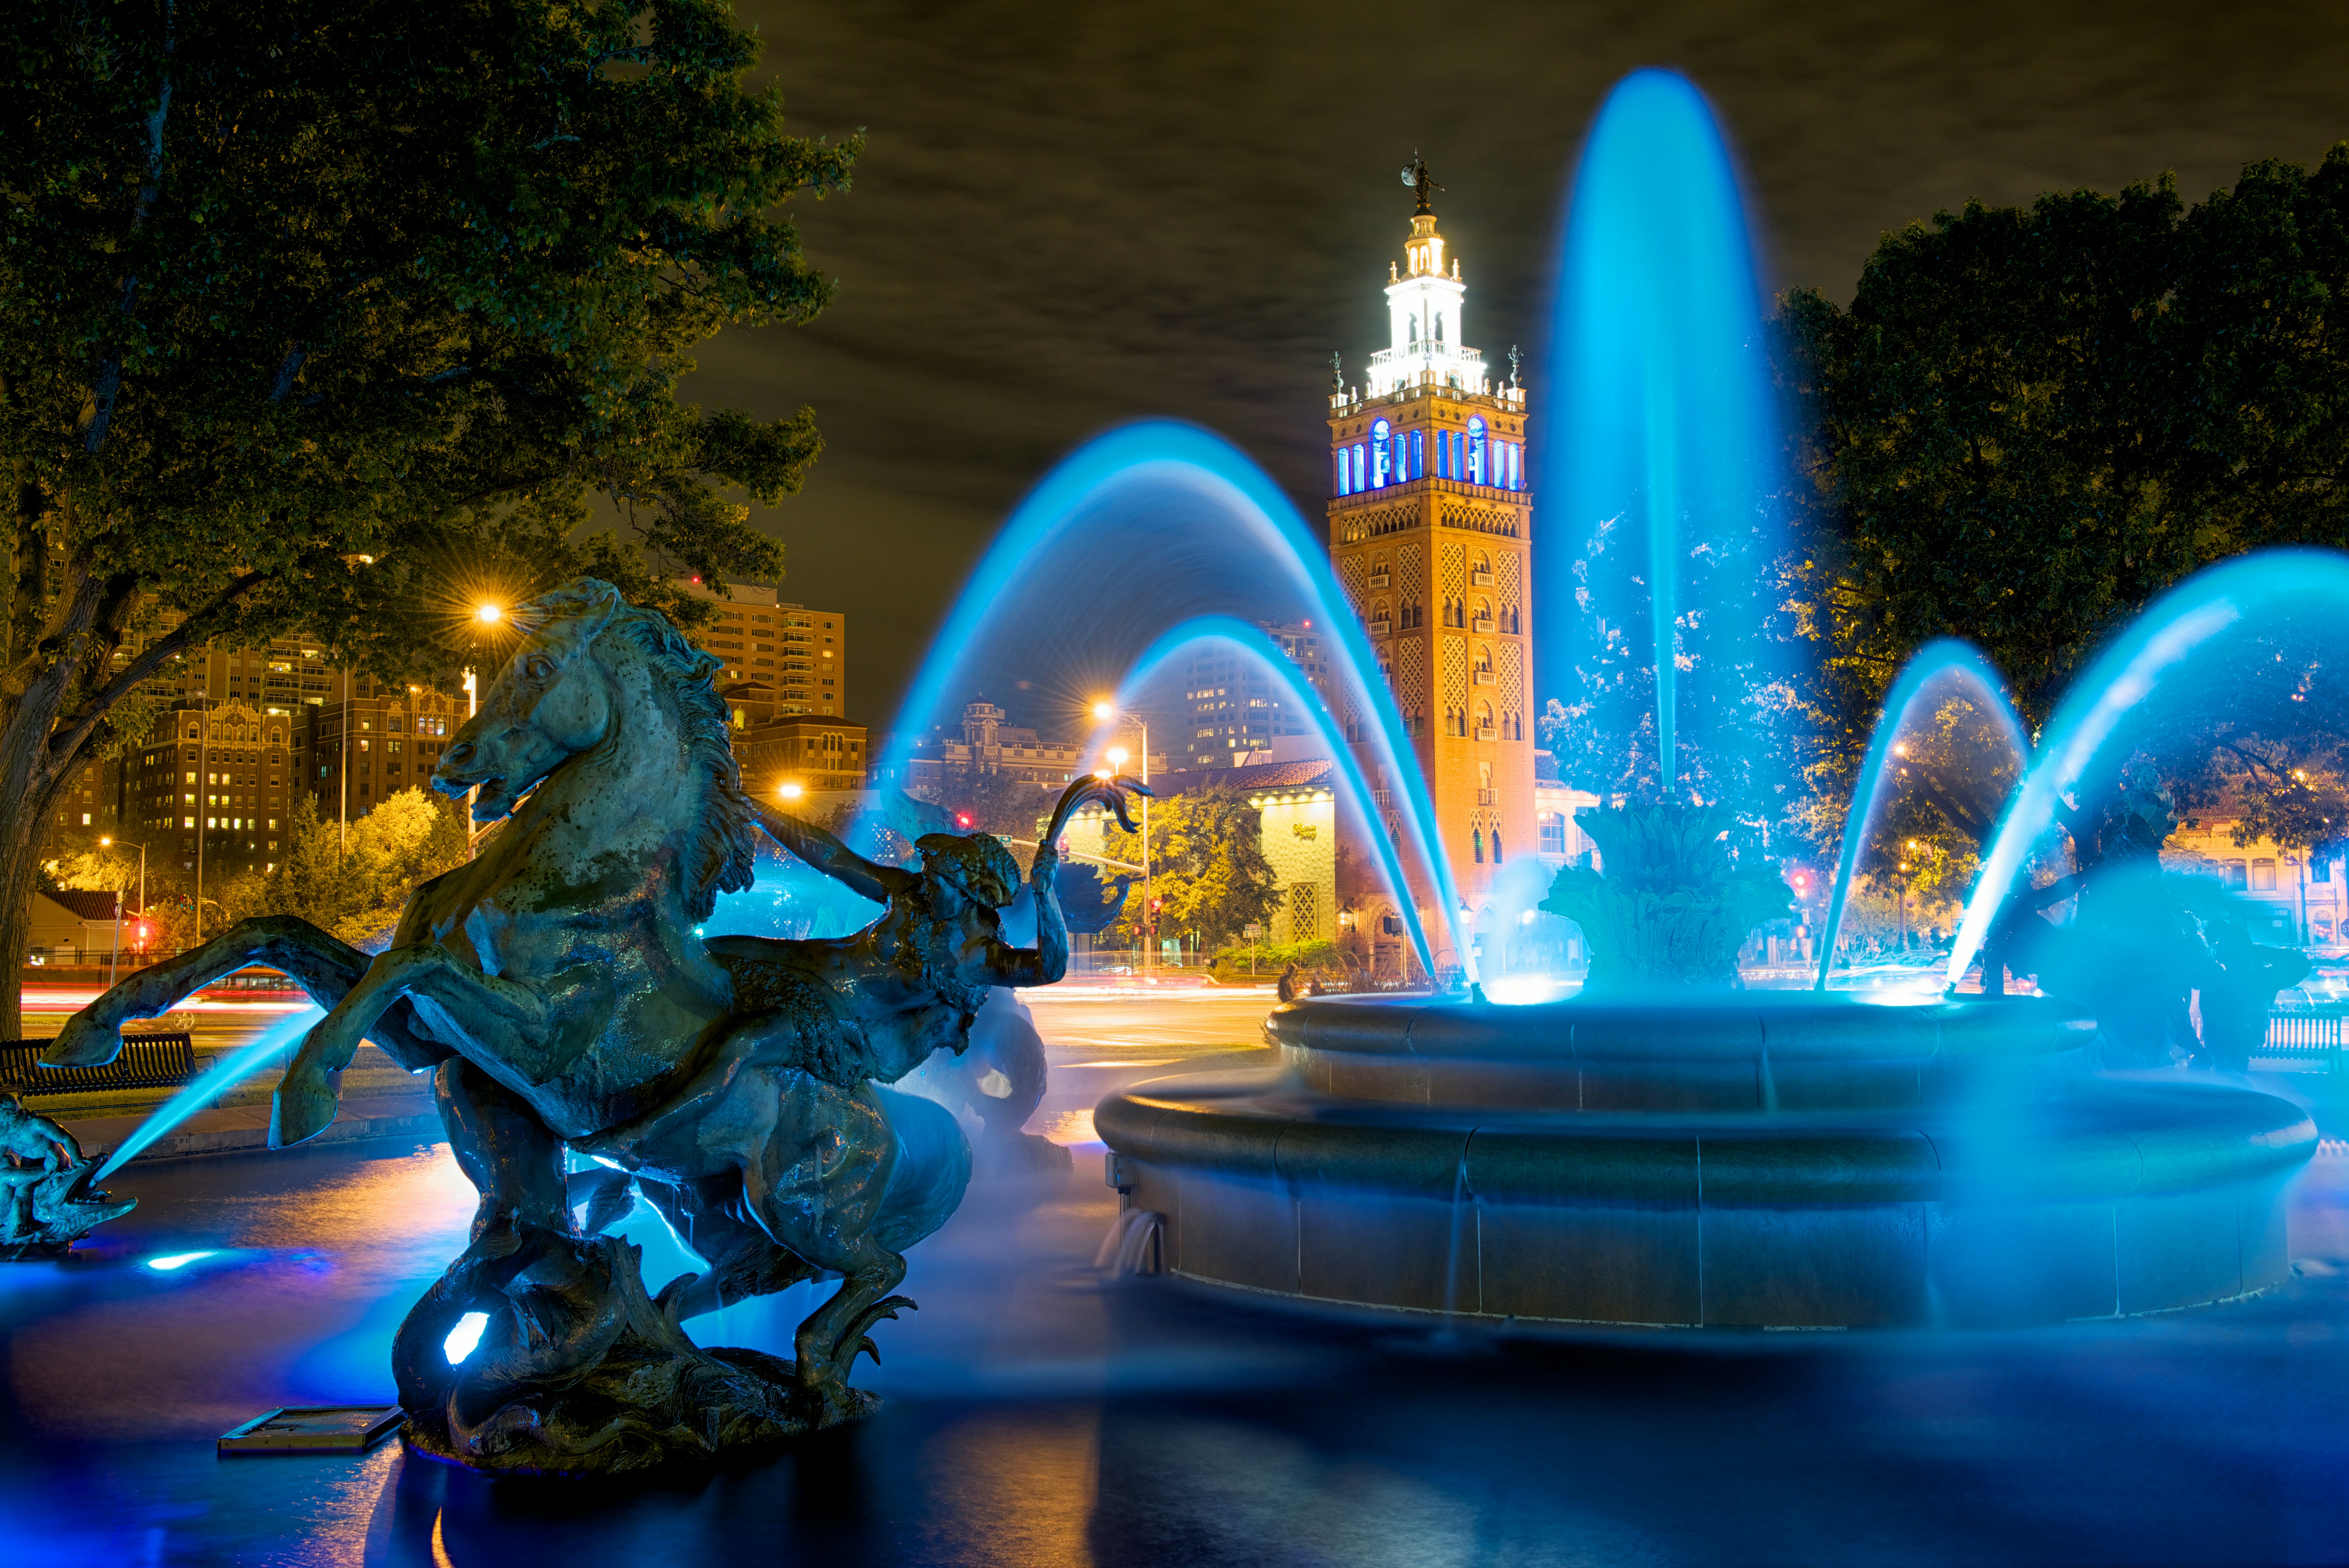 Streams of water is illuminated by blue light spray from a stone fountain. In front of the fountain is a man riding a large horse. 